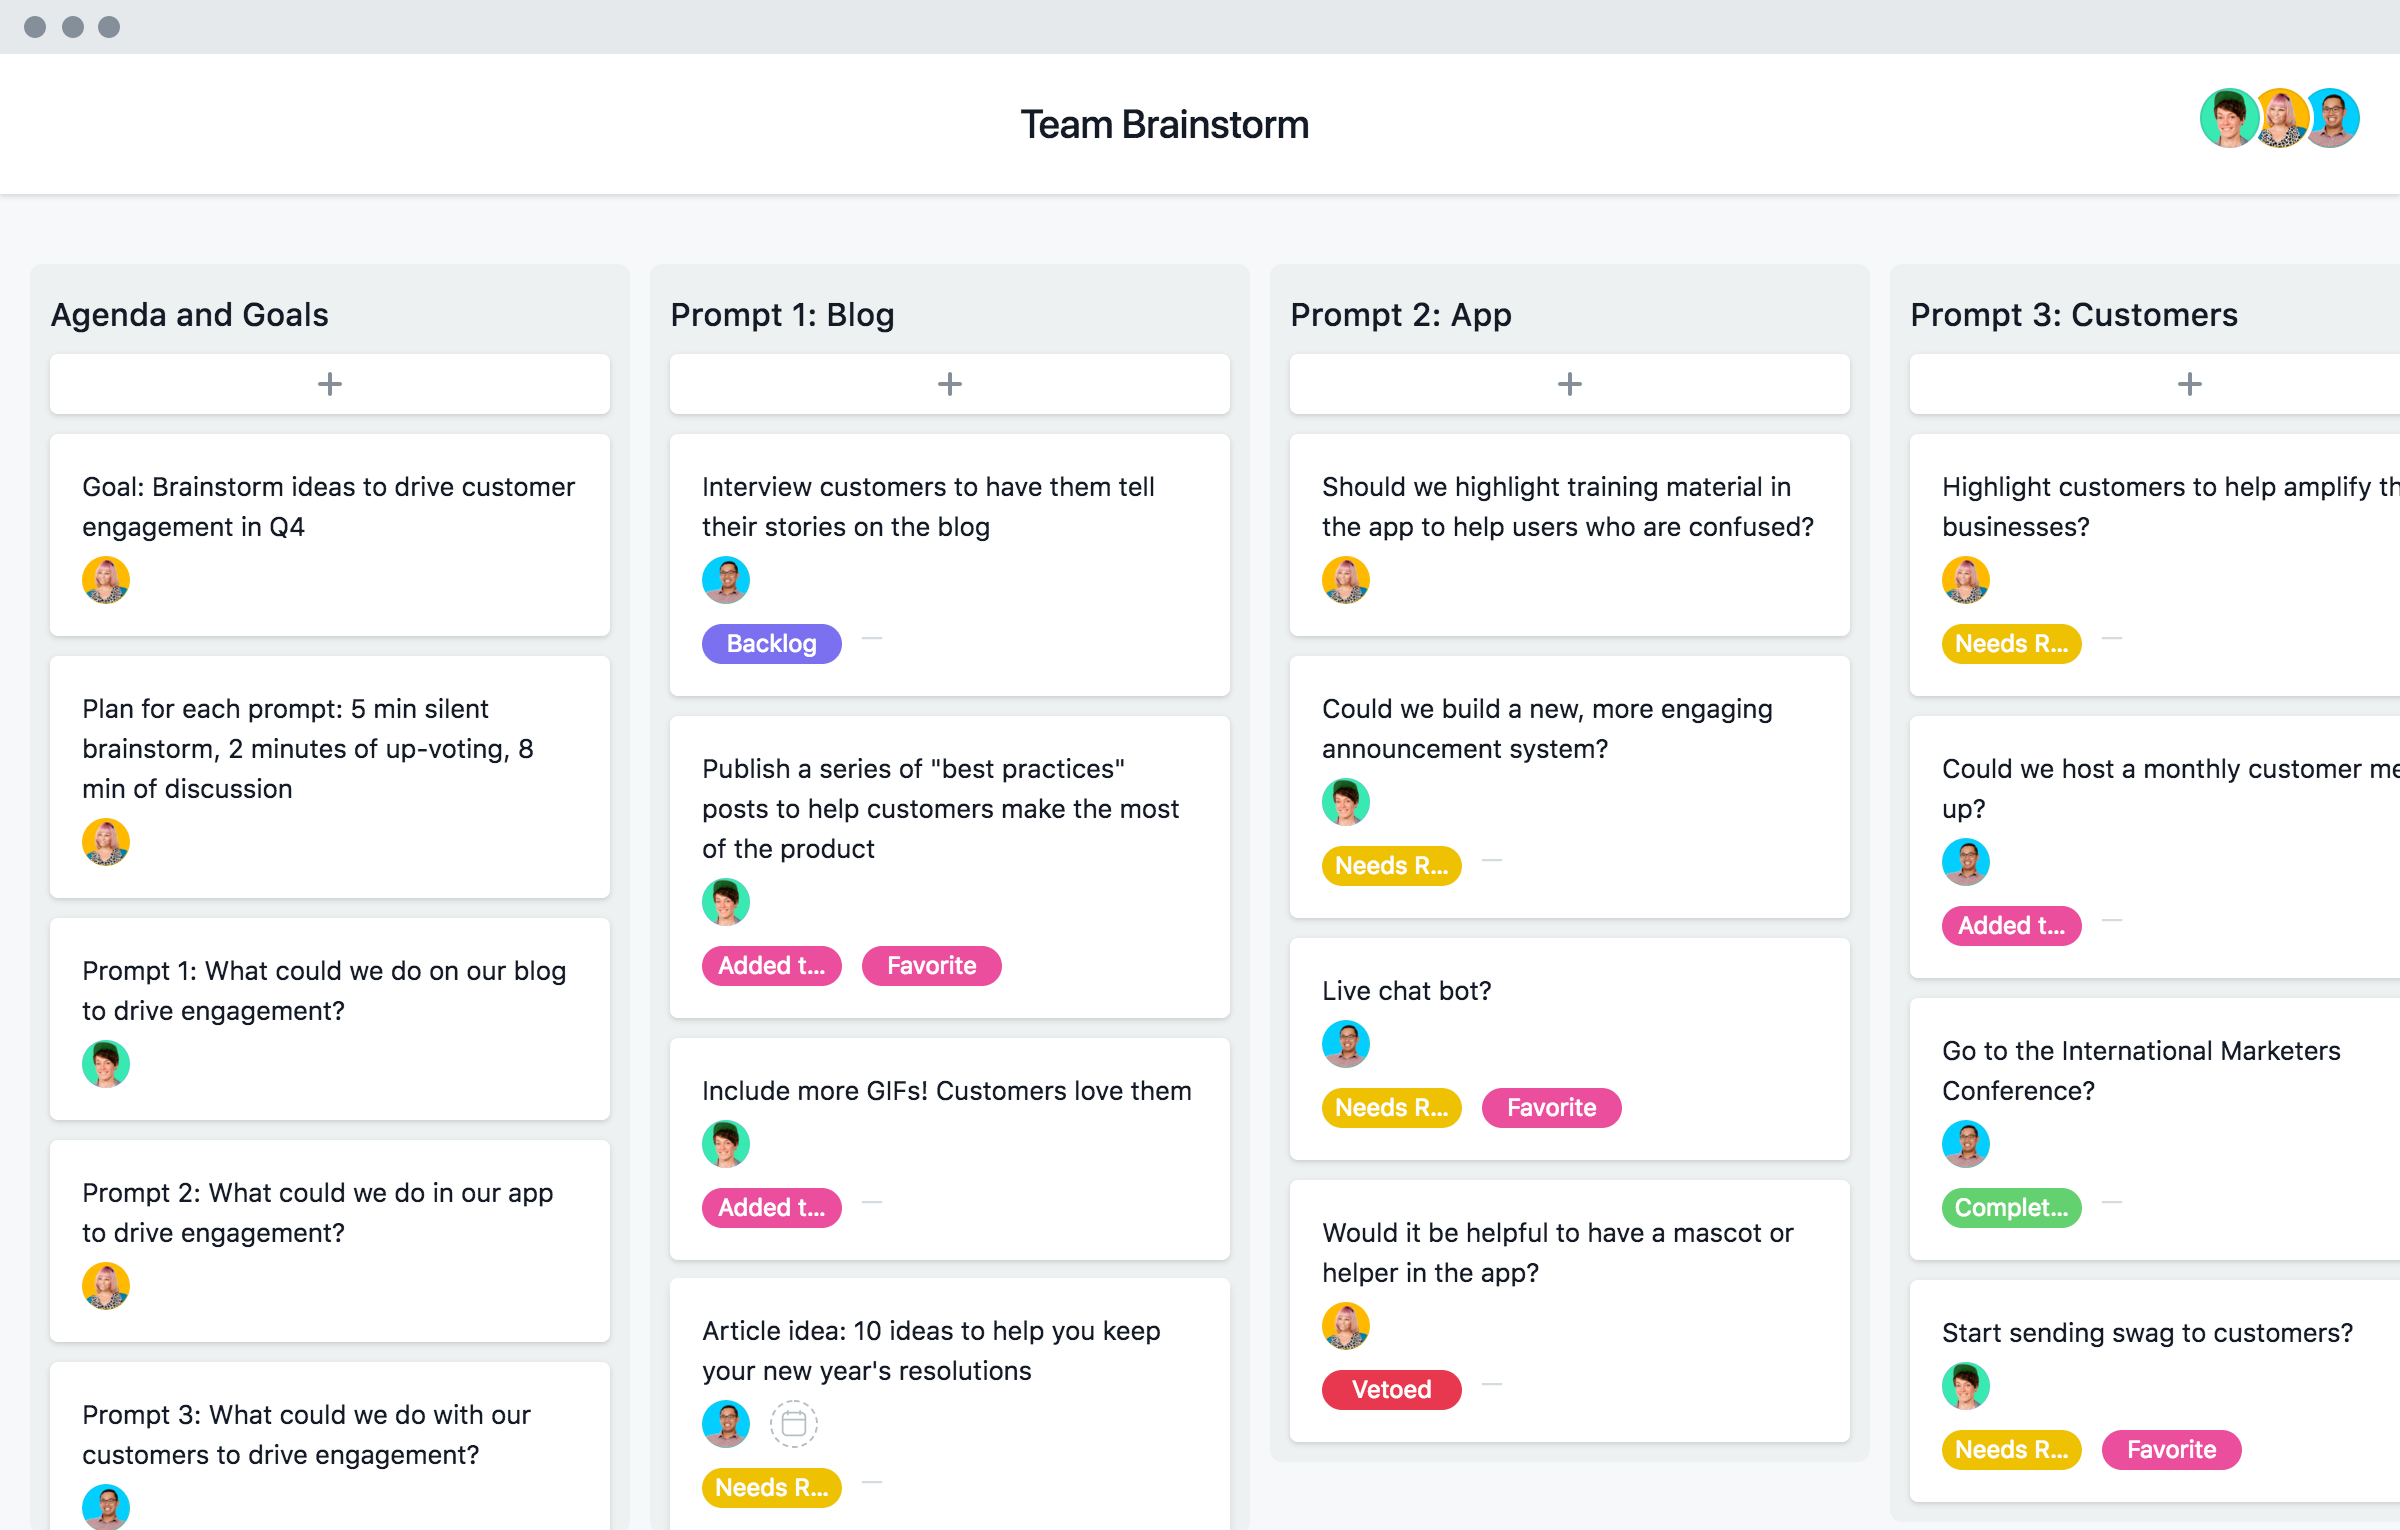 [Old product ui] Cross-functional team brainstorming template in Asana, Kanban board style project view (Boards)